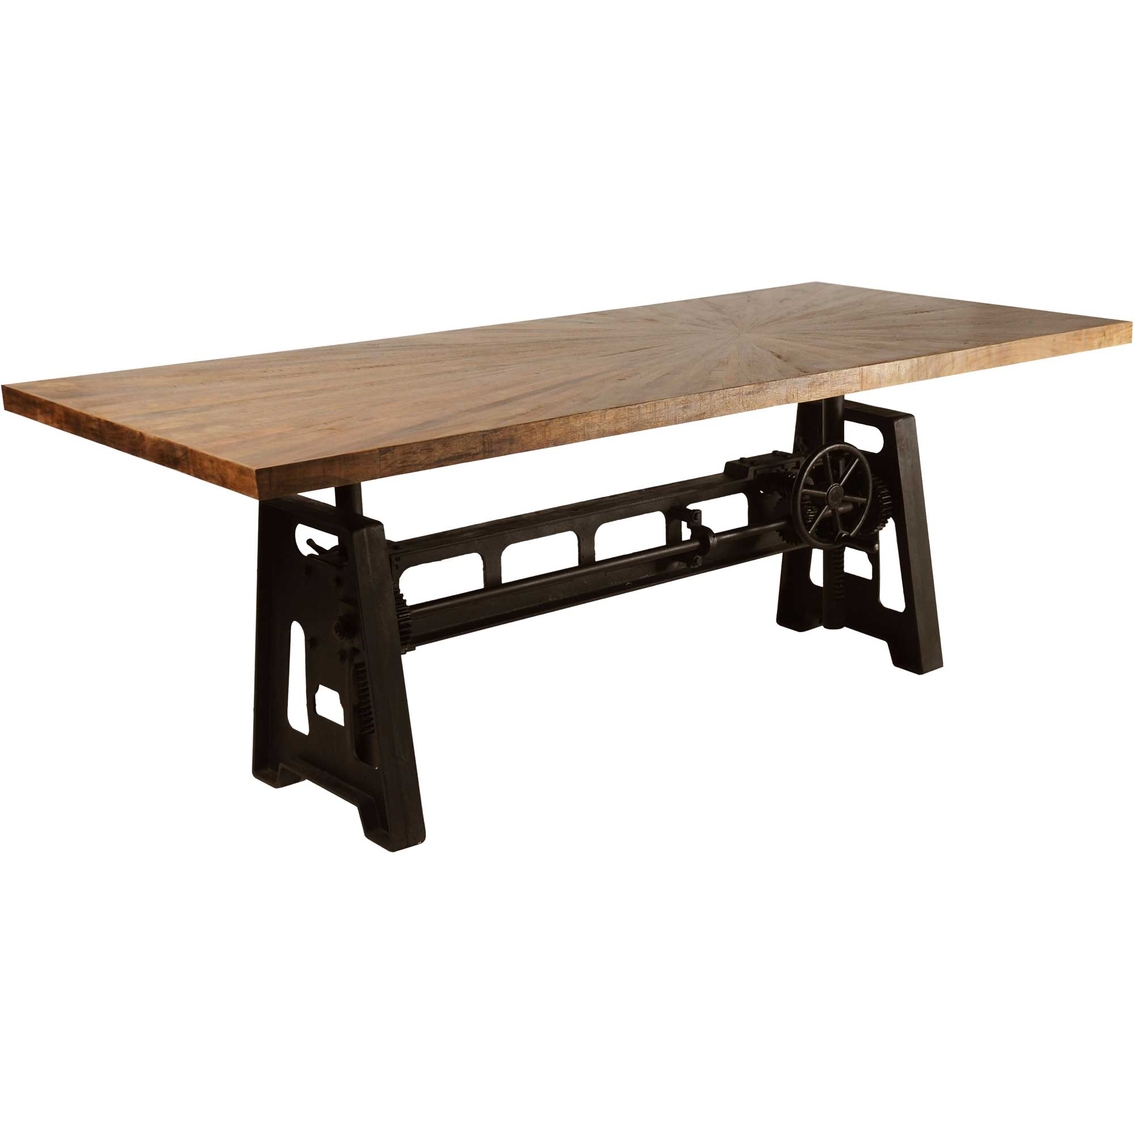 Coast to Coast Accents Del Sol Adjustable Height Crank Dining Table - Image 2 of 7